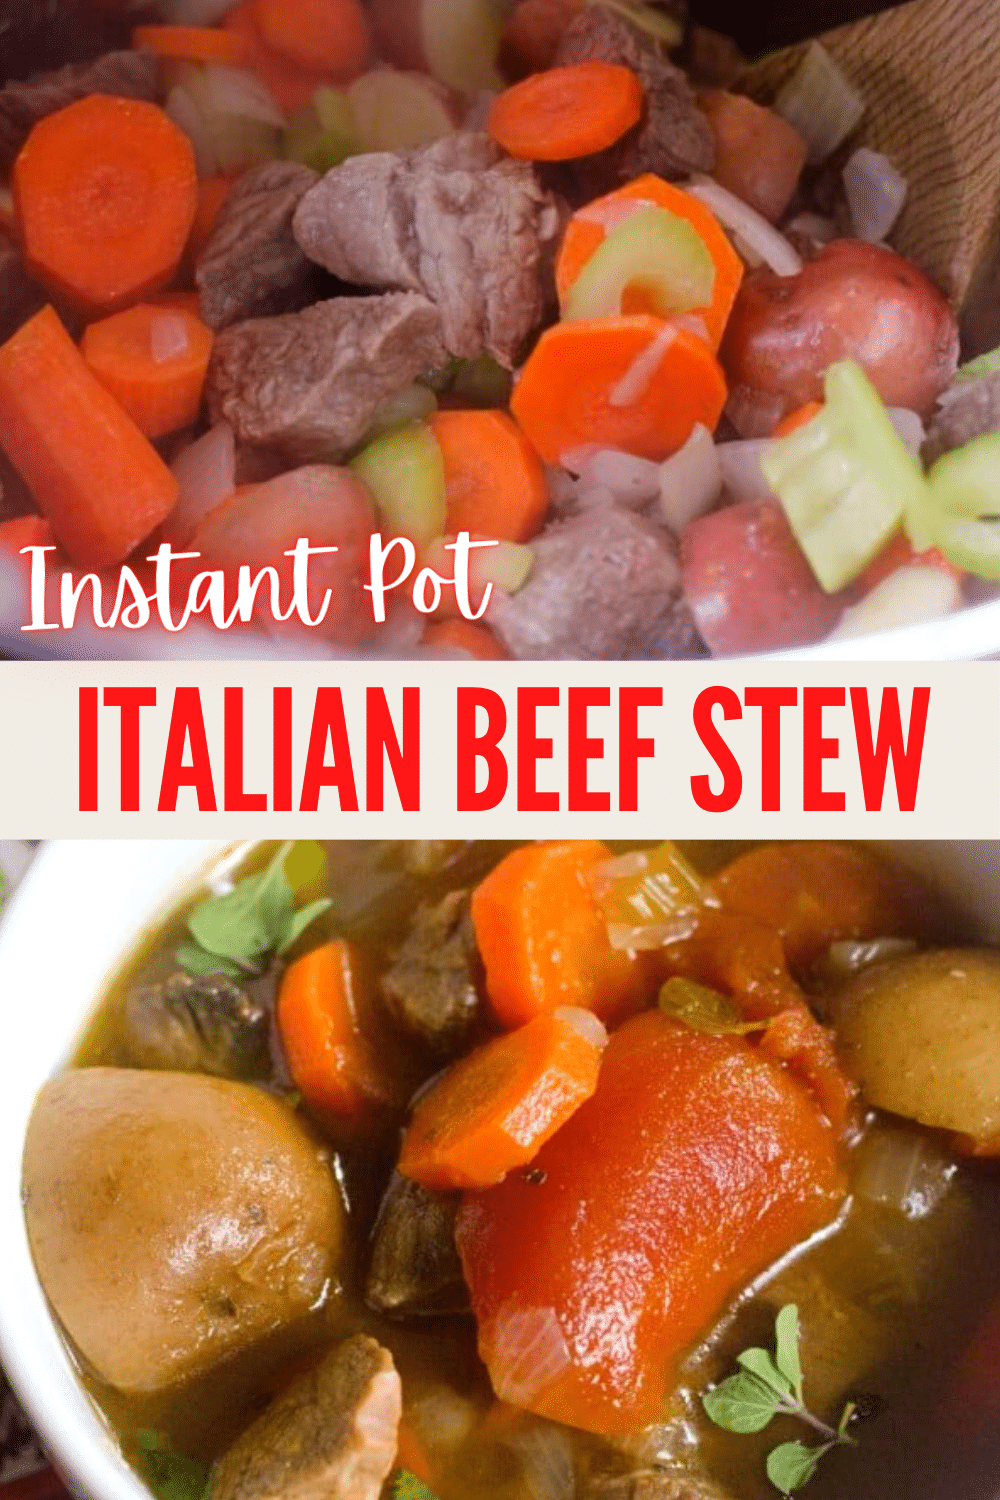 You're going to love everything about this Instant Pot Italian Beef Stew! It's easy, ready quickly, full of great flavor and colors, and is super satisfying! #instantpot #pressurecooker #beefstew #easydinner via @wondermomwannab